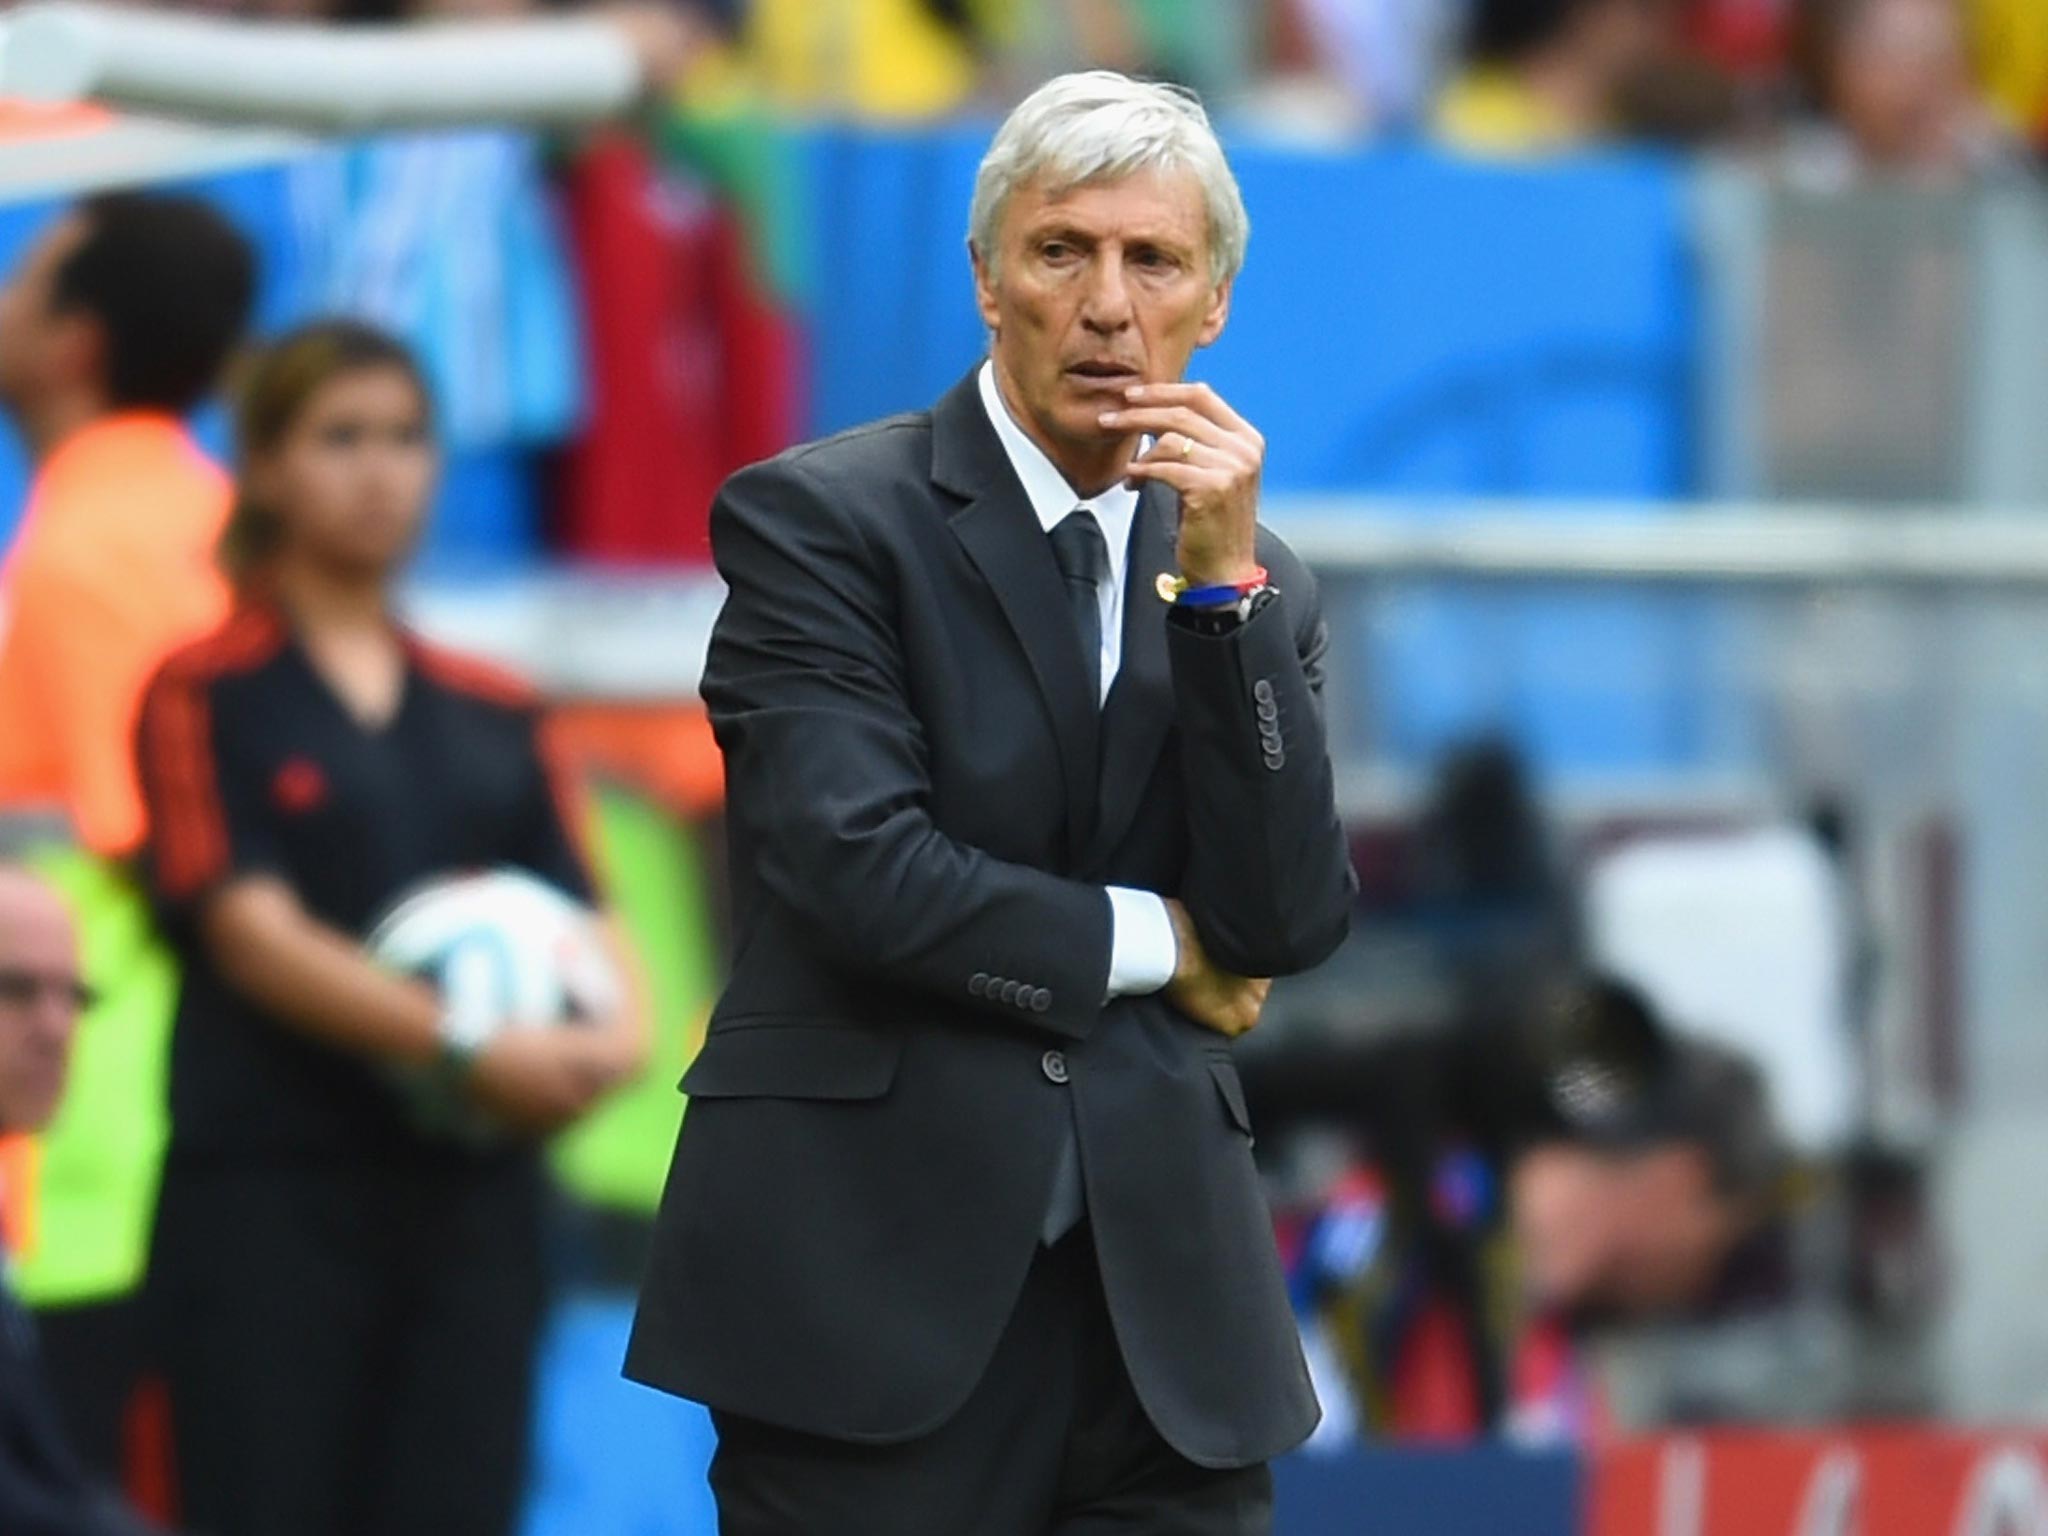 Head coach Jose Pekerman has led Colombia to their first World Cup finals since 1998